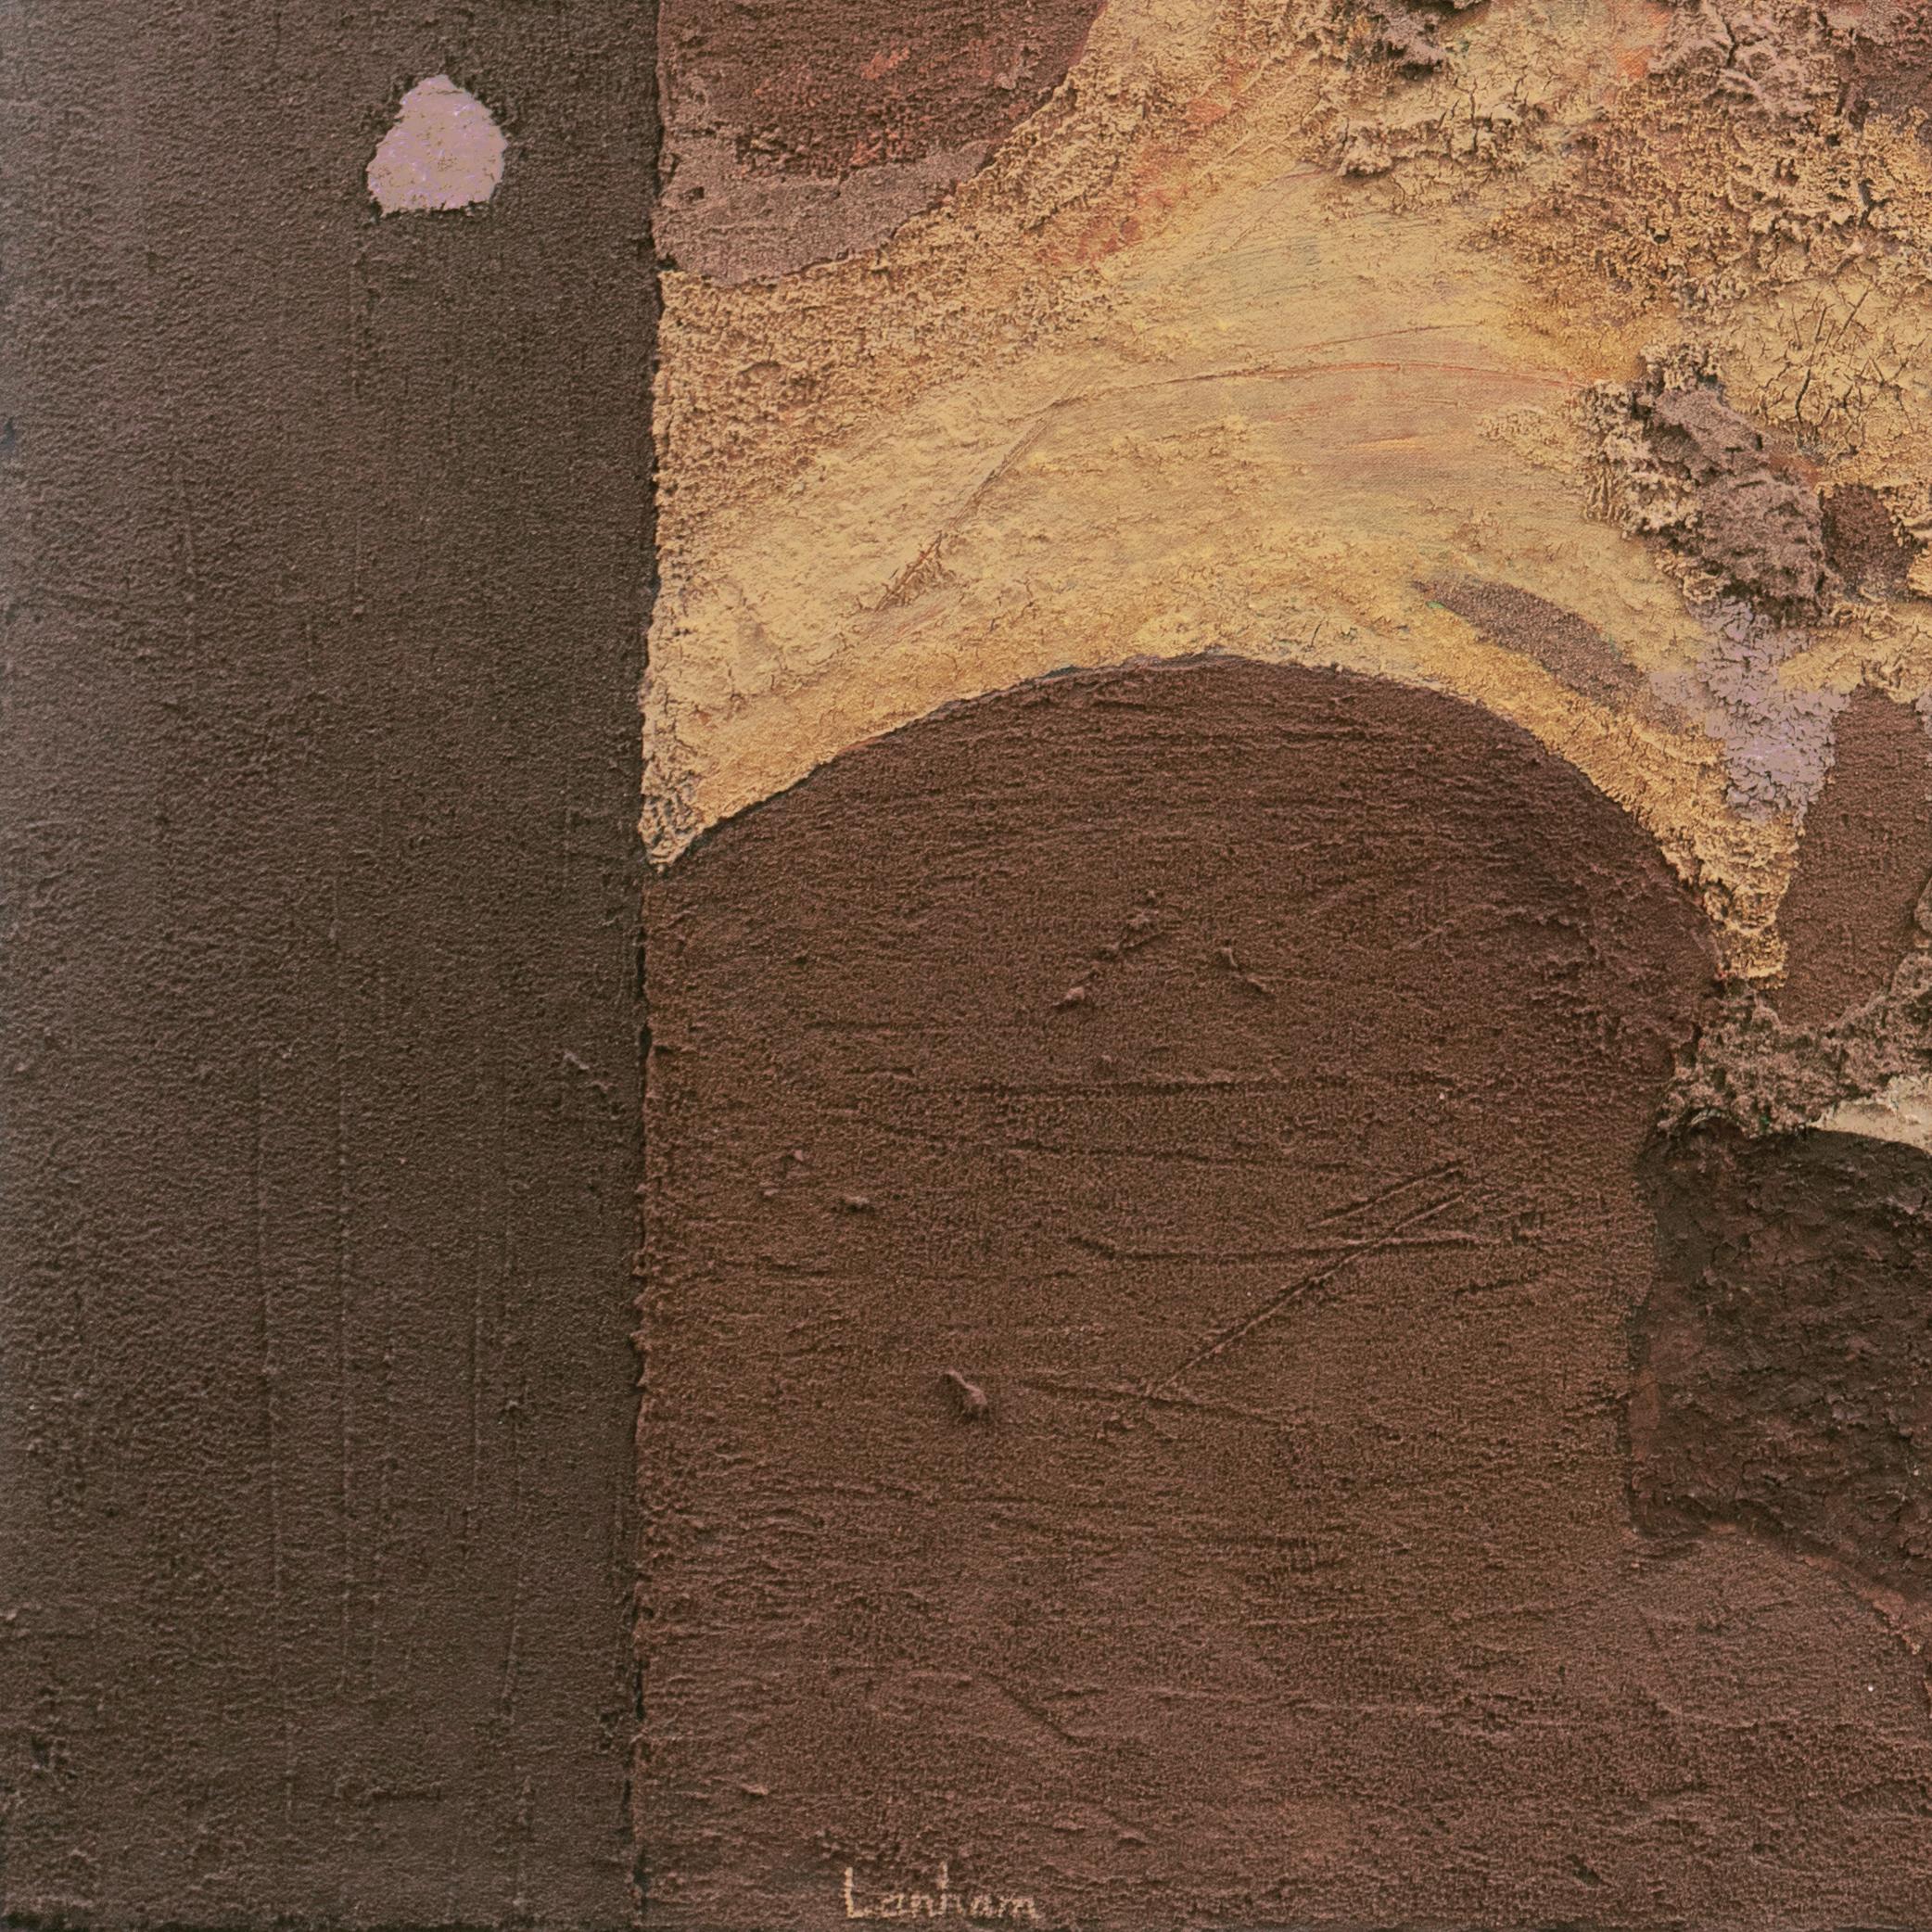 'Abstract in Ochre and Umber', California Woman artist, Palo Alto, San Jose 1